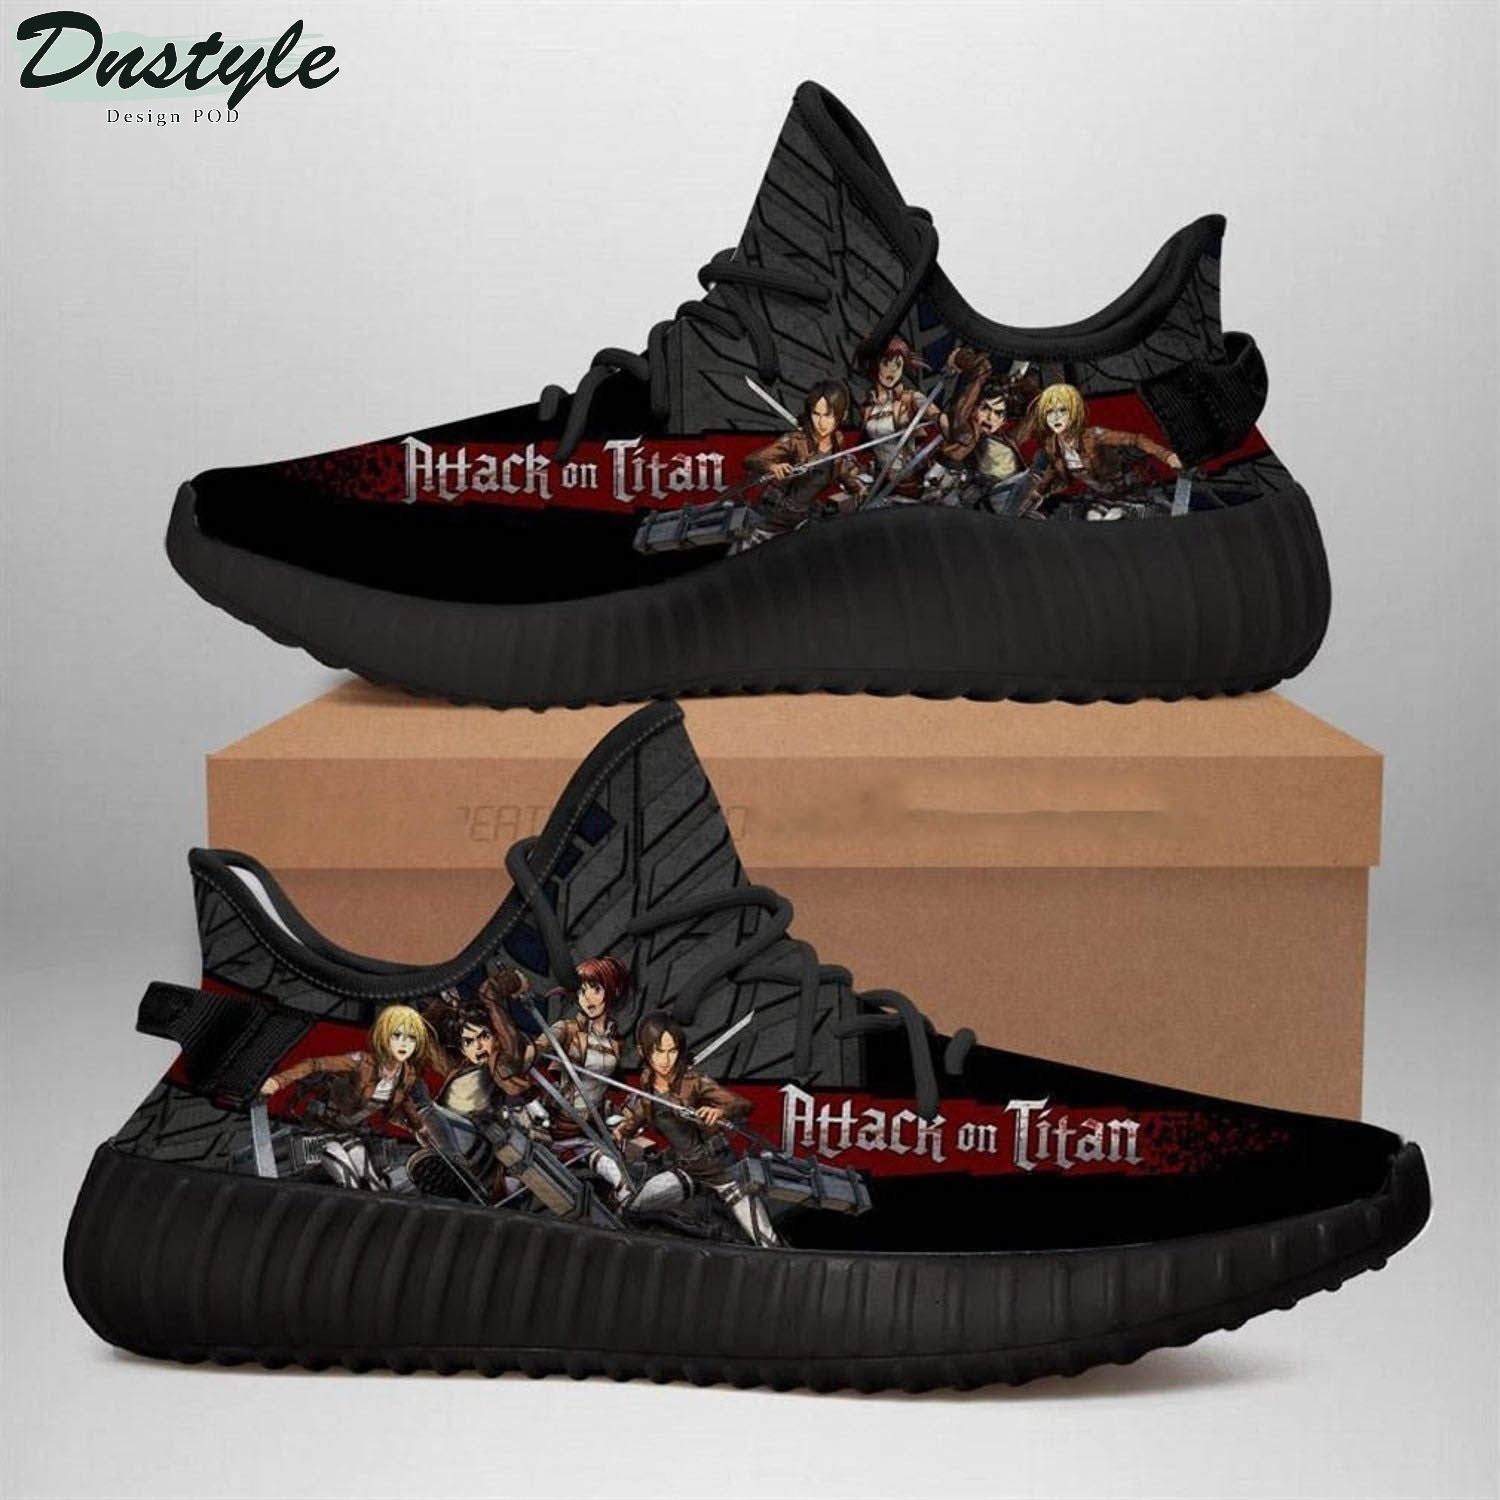 Attack On Titan Anime Black Yeezy Shoes Sneakers